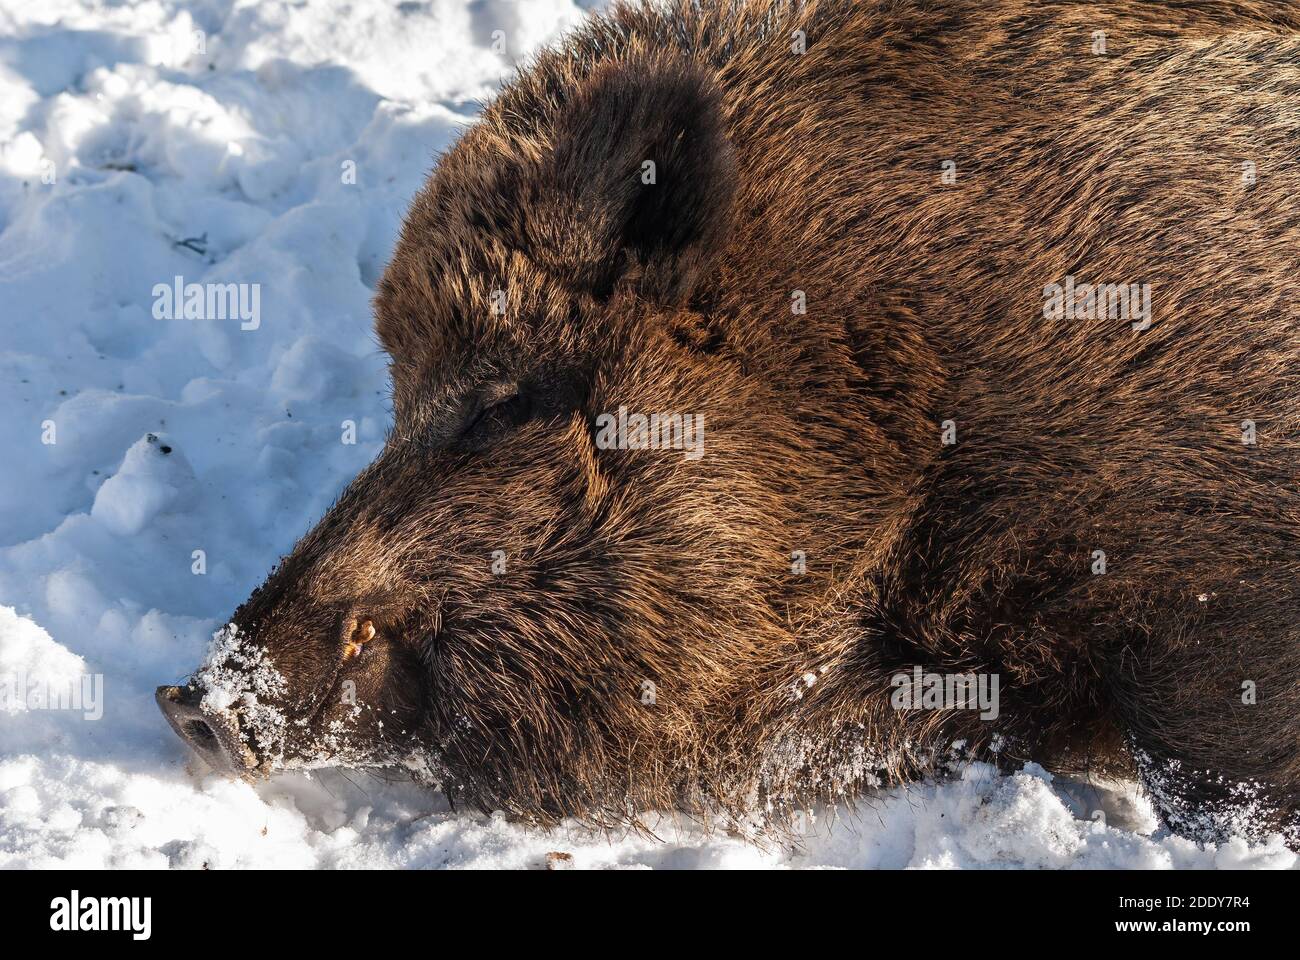 A wild boar lies in the snow in the winter forest. Stock Photo